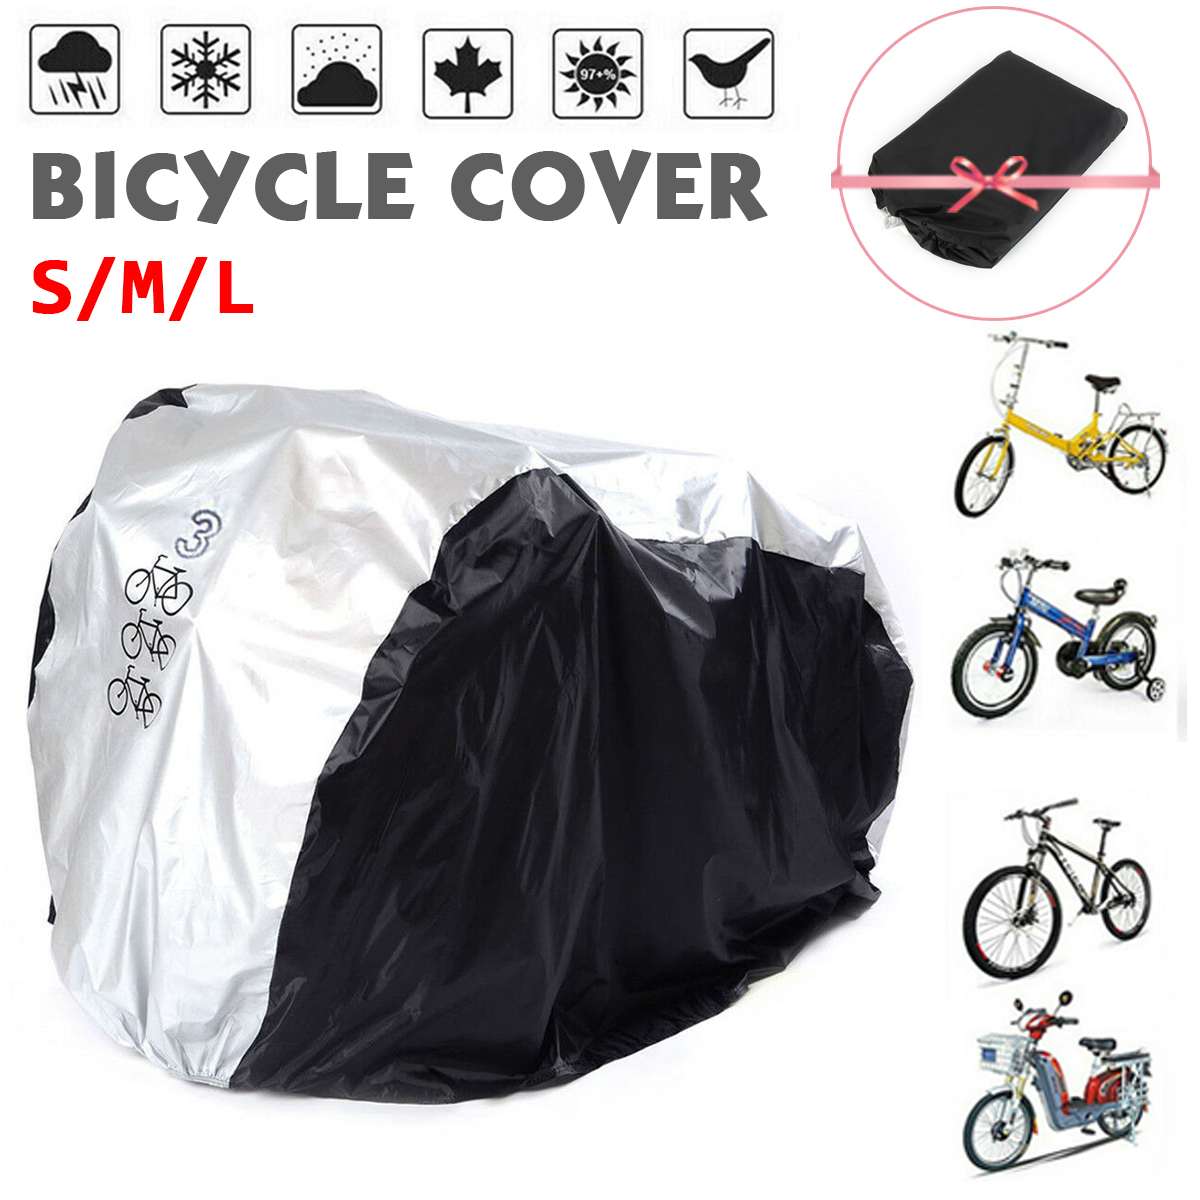 Fiets Motorfiets Cover M L S Outdoor Uv Waterdichte Fiets Voor Motorfiets Dekzeil Motorfiets Deken Motor Cyclus Cover